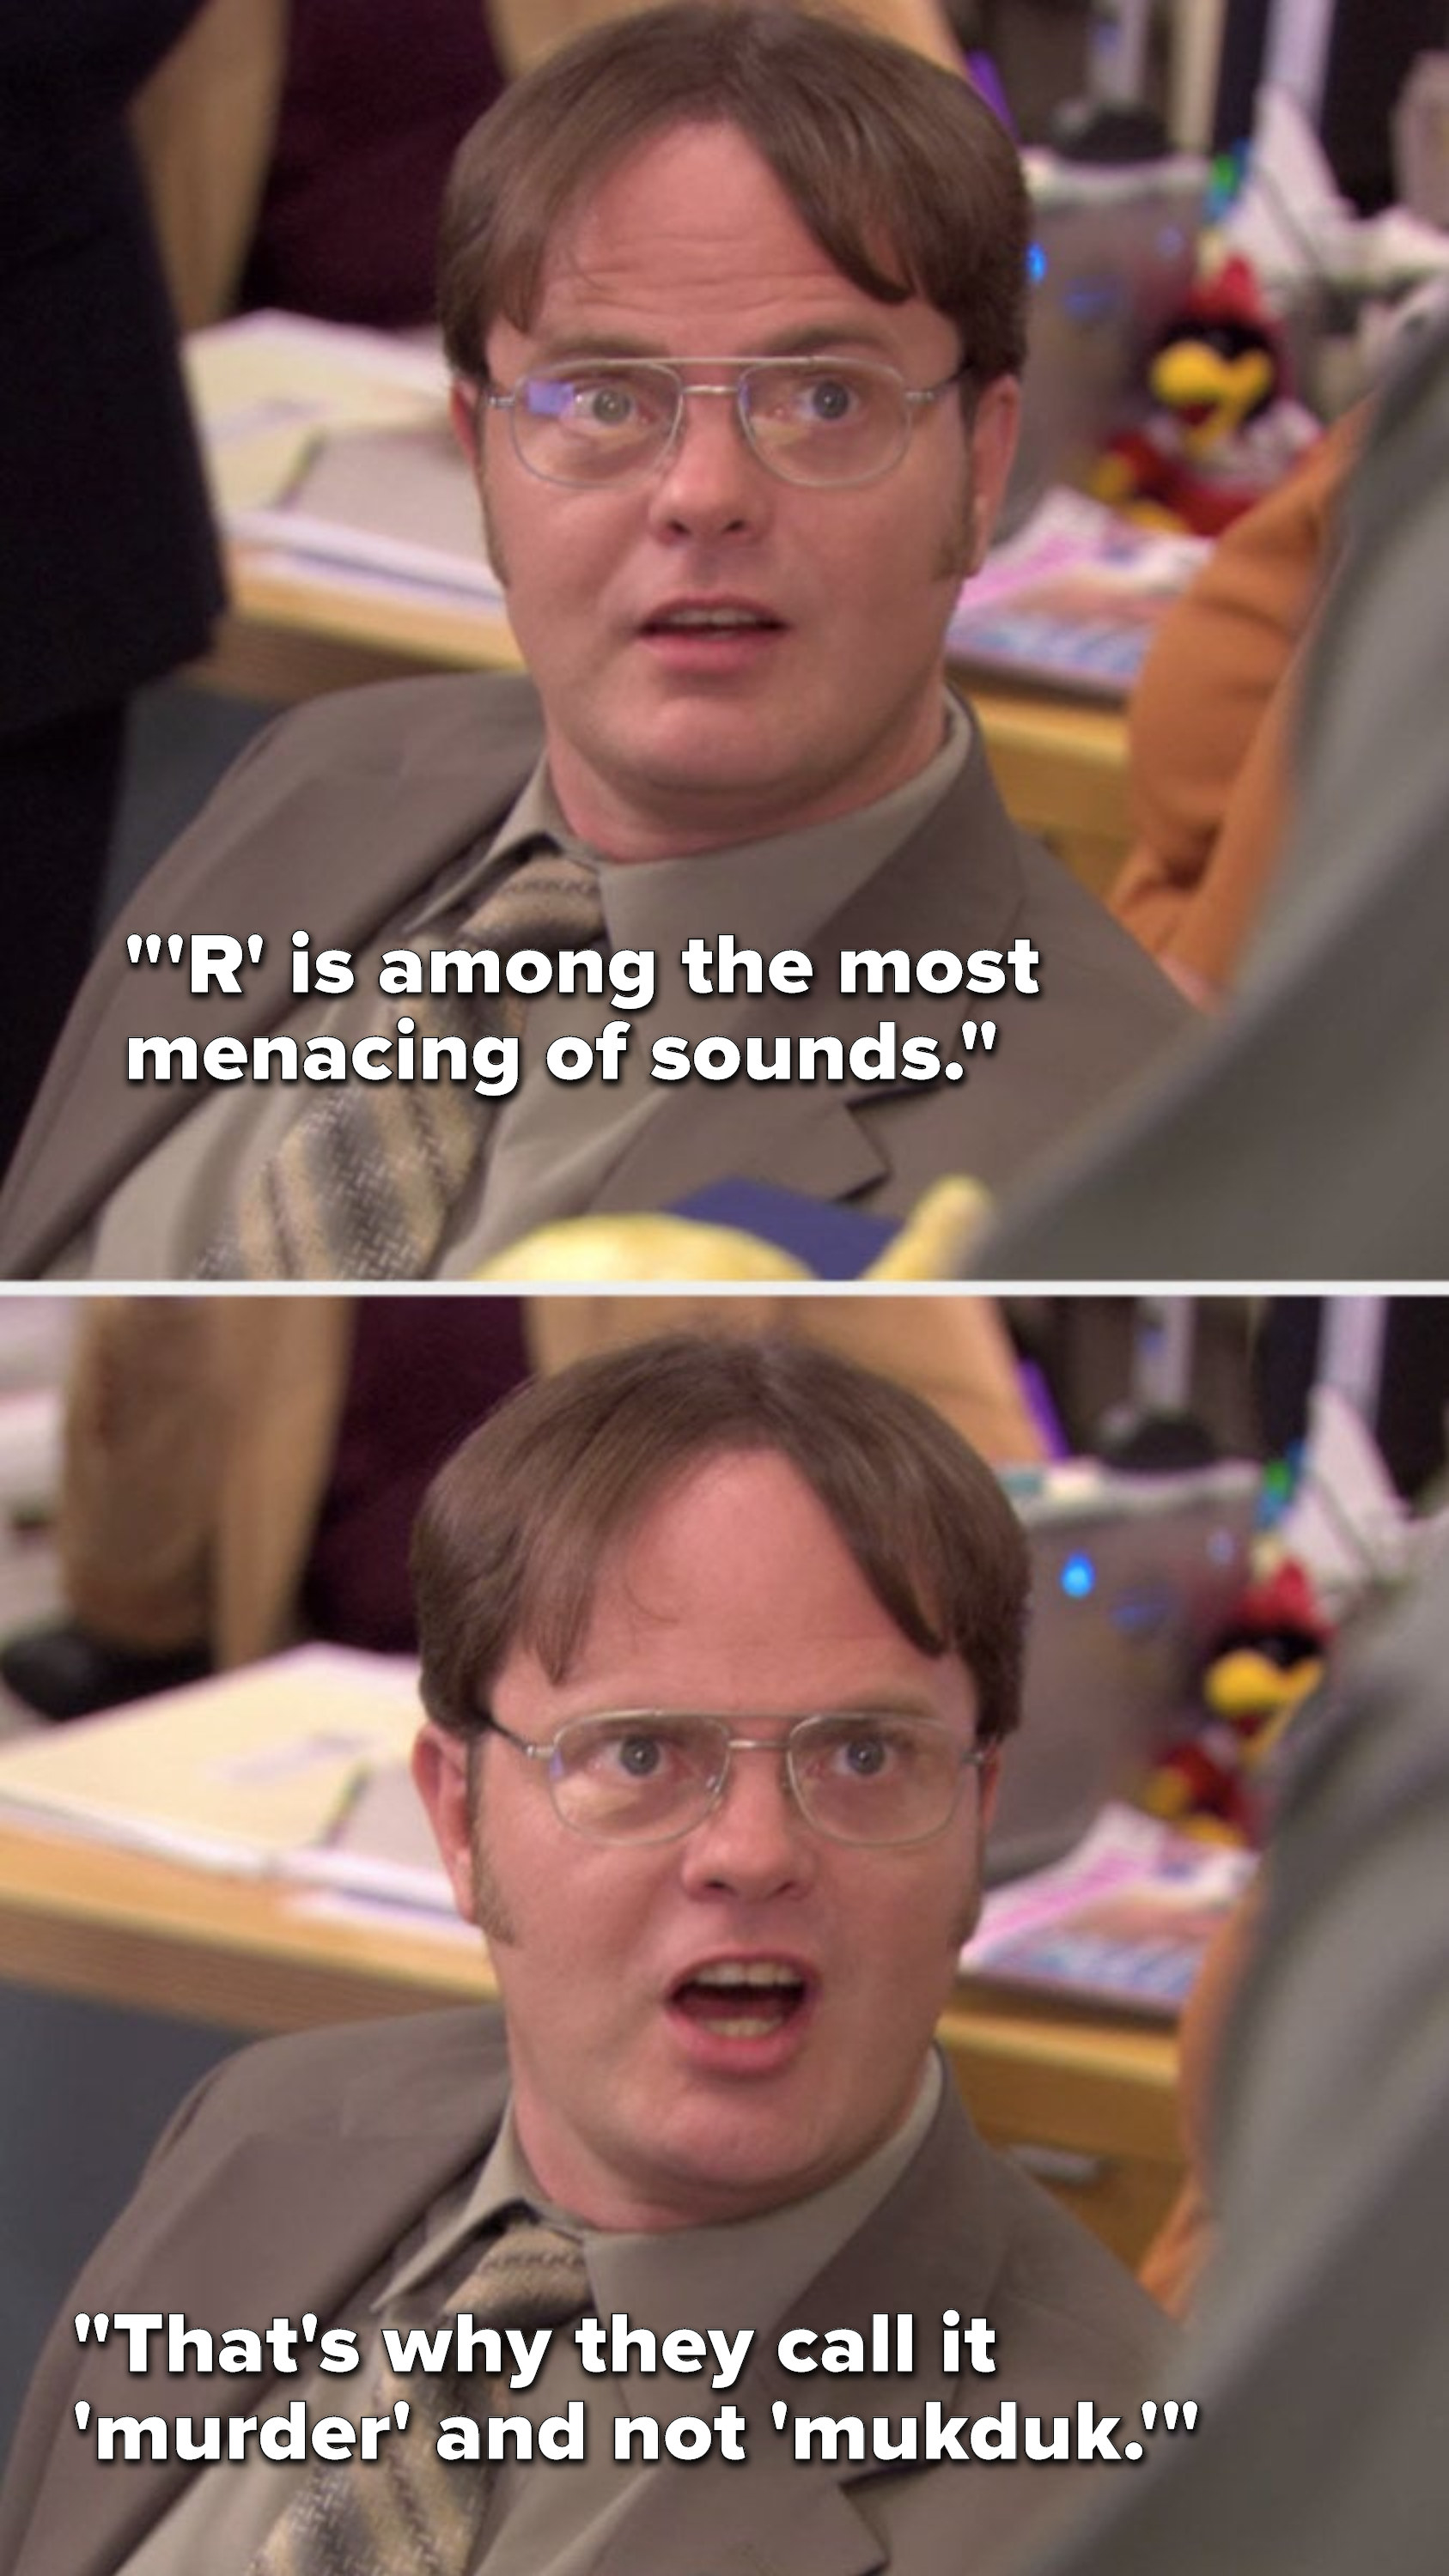 Dwight says, &quot;&#x27;R&#x27; is among the most menacing of sounds, that&#x27;s why they call it &#x27;murder&#x27; and not &#x27;mukduk&#x27;&quot;